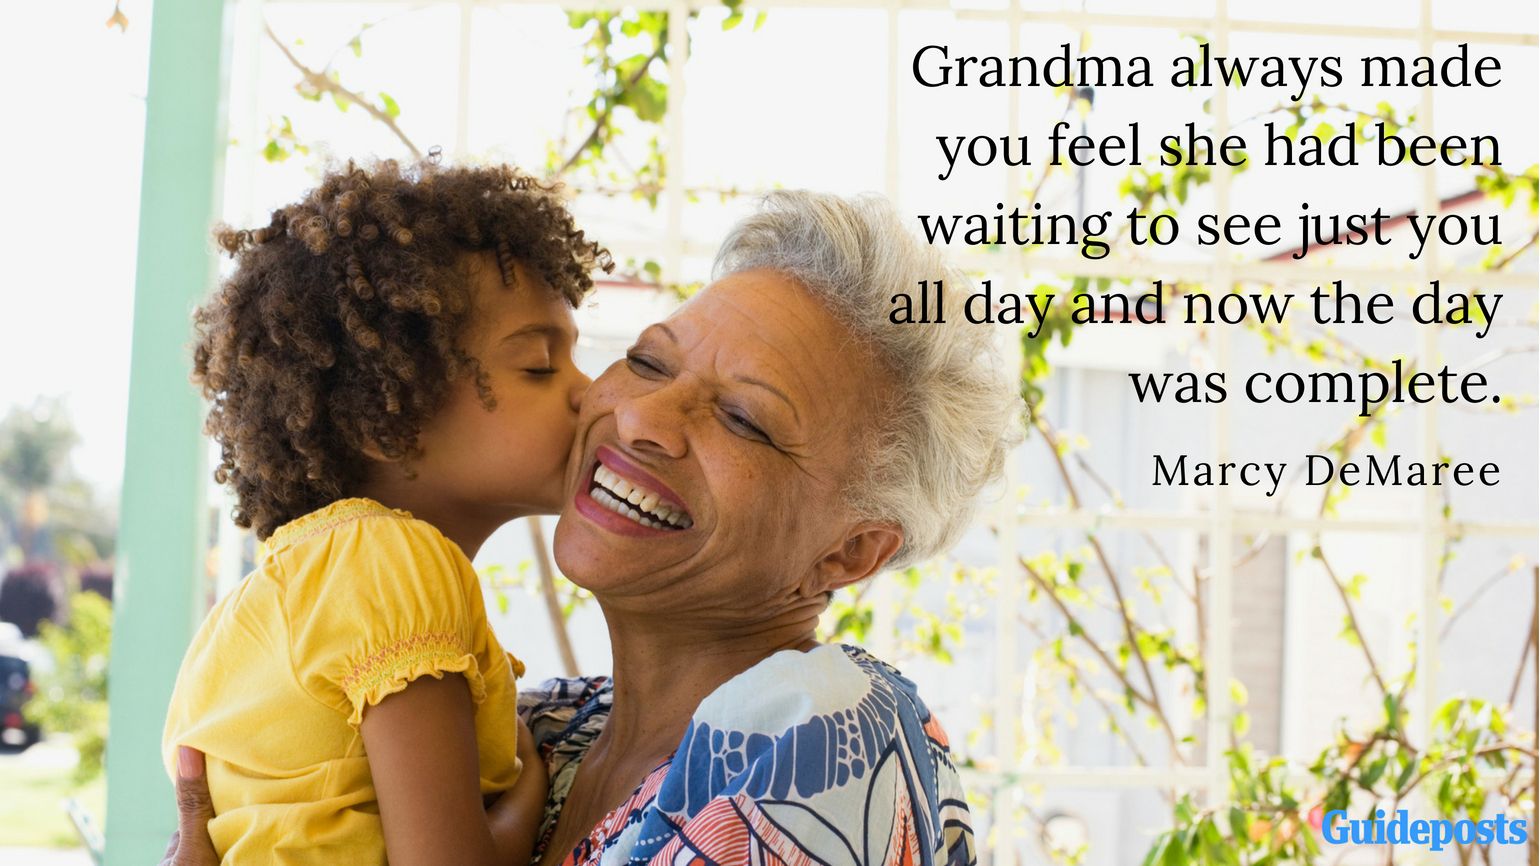 Grandma always made you feel she had been waiting to see just you all day and now the day was complete. —Marcy DeMaree